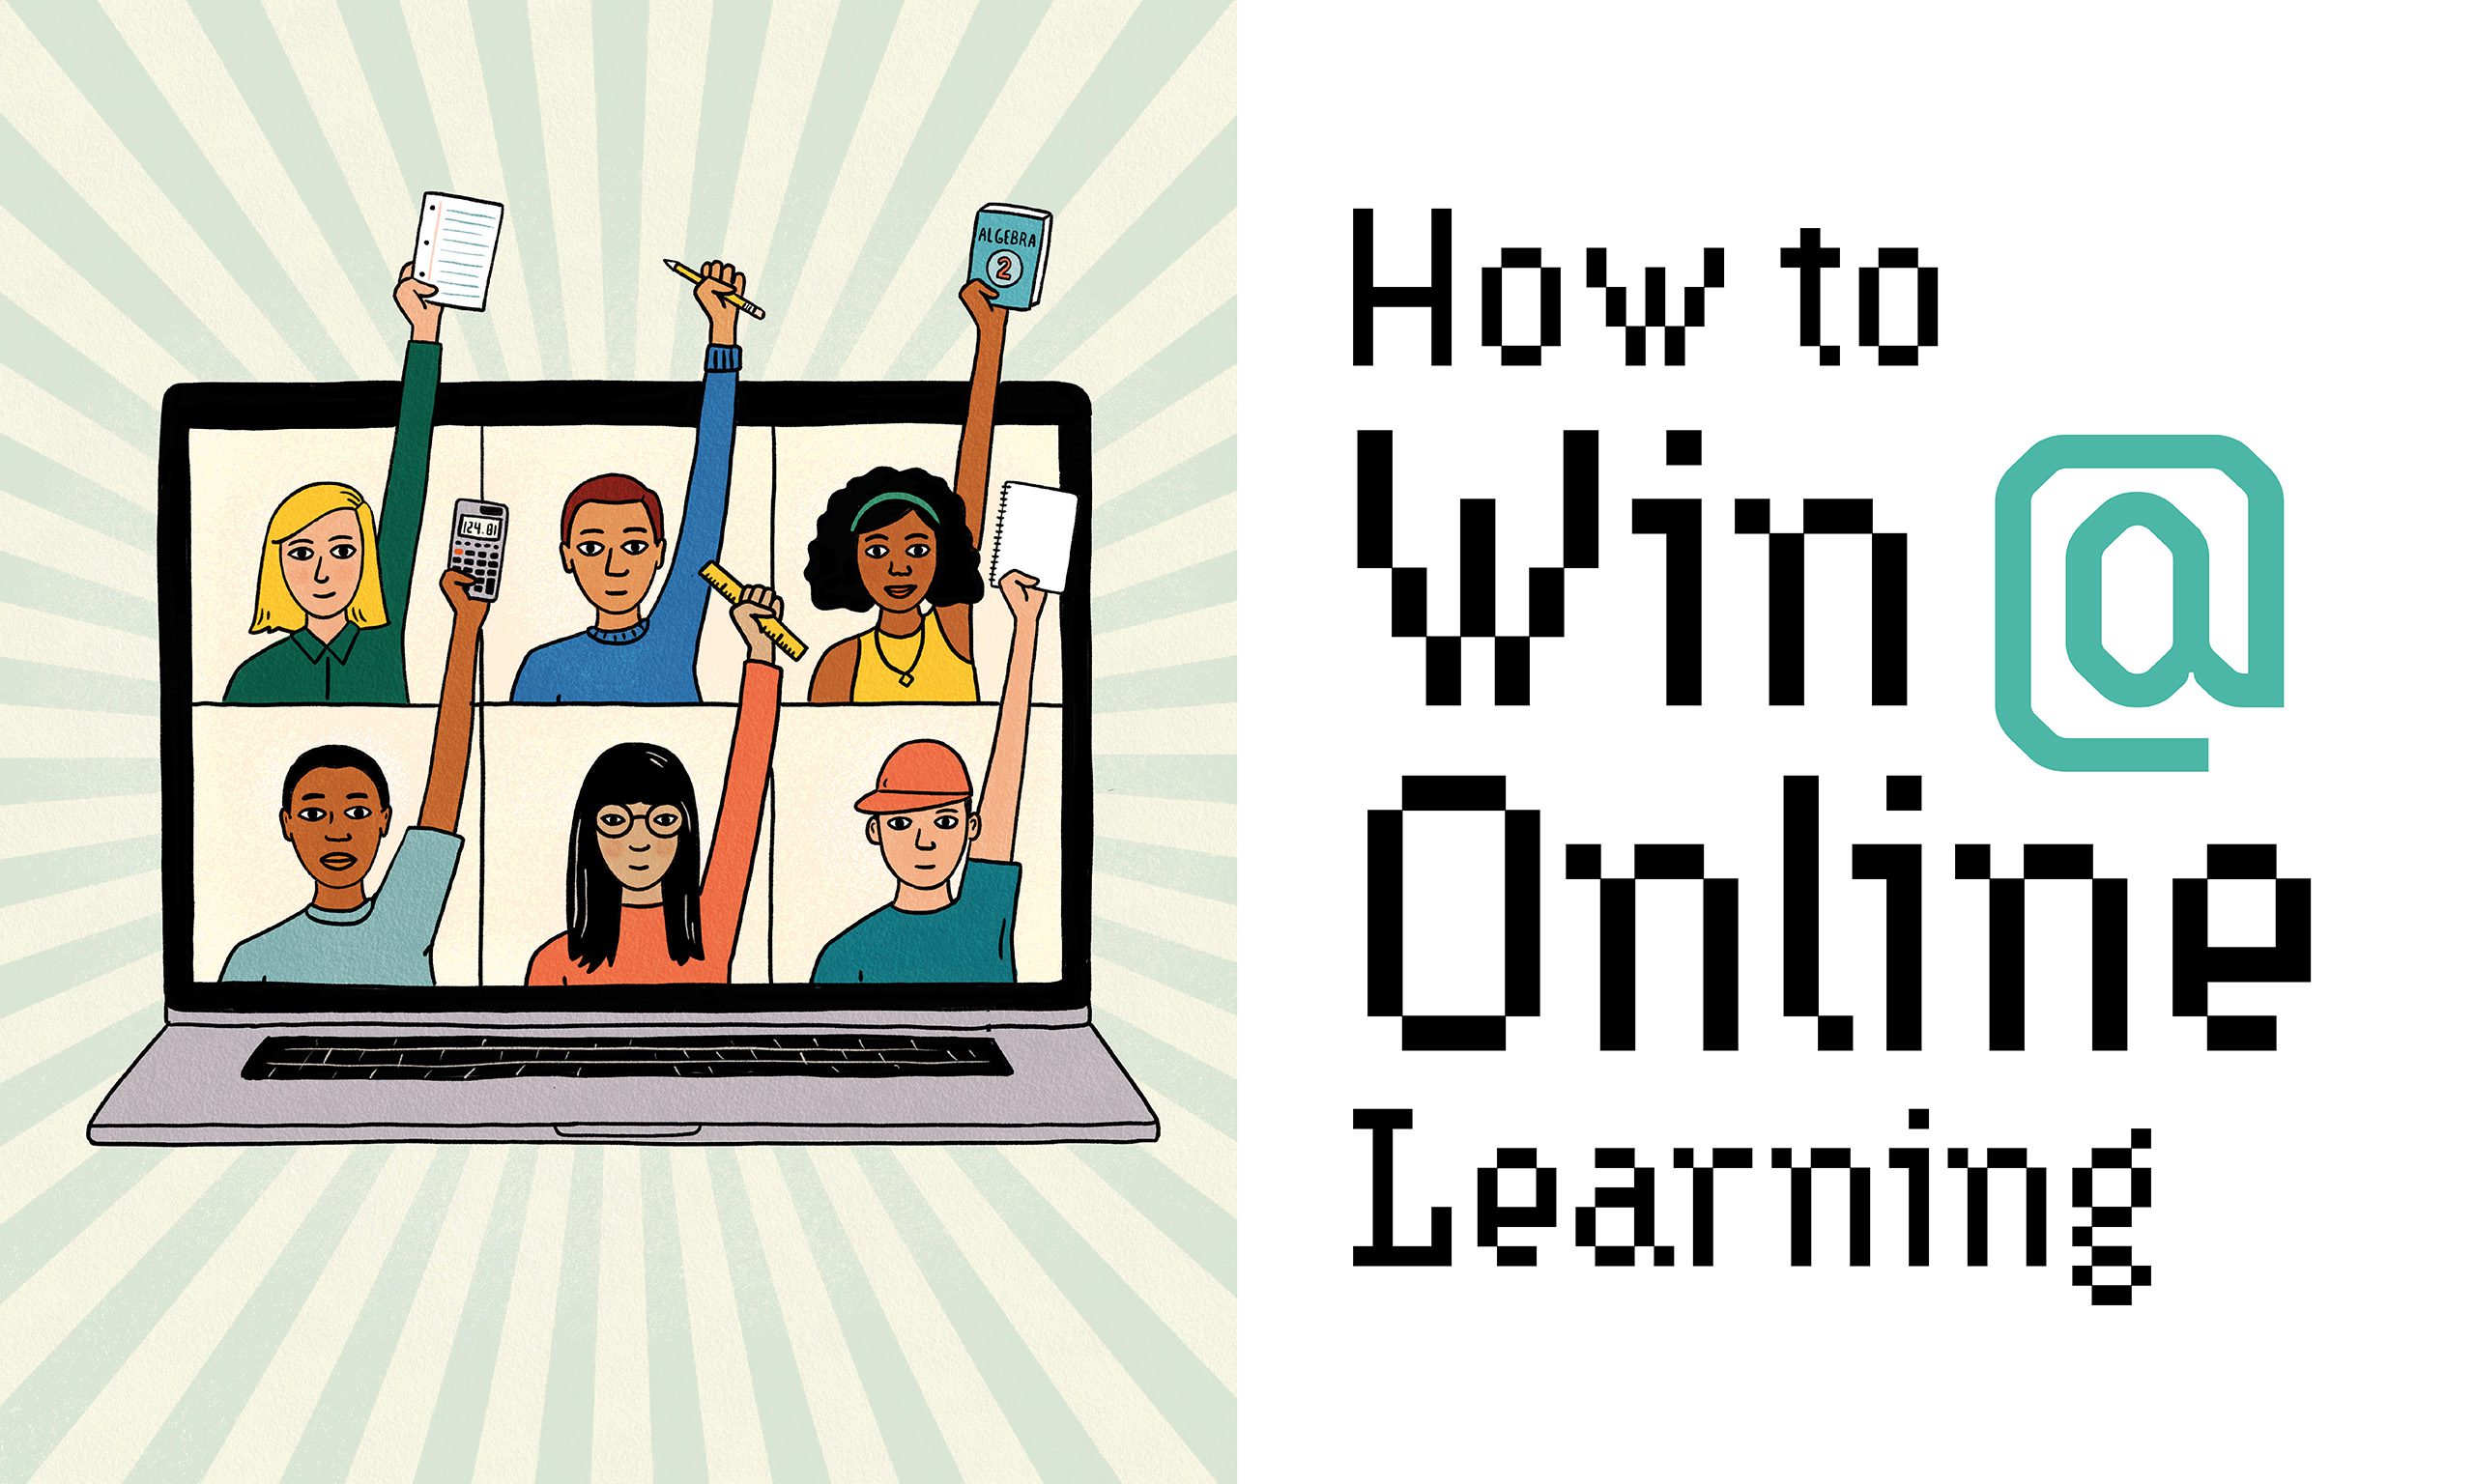 Title image of article "How to Win @ Online Learning" with illustration of children raising hands on a laptop screen in an online classroom.